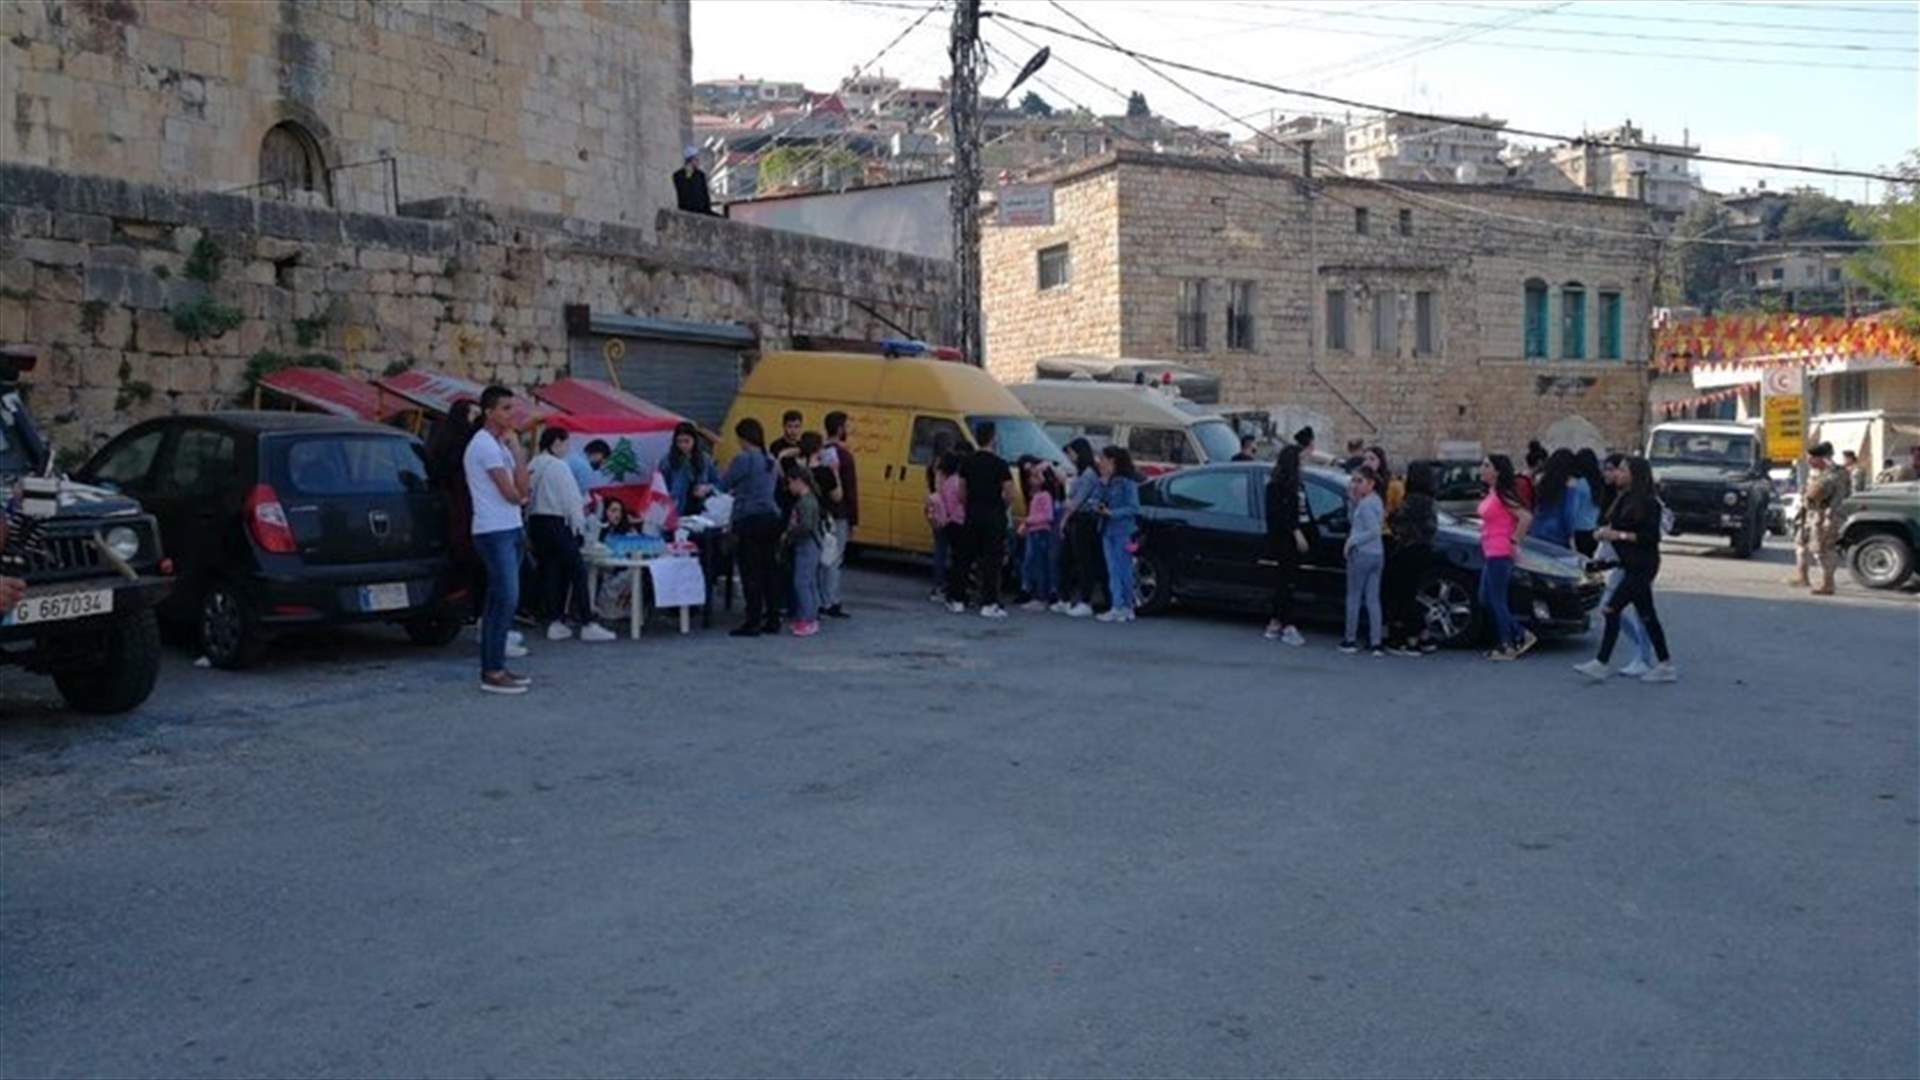 On the 25th day of protests, students and residents of Hasbaya towns continue their movements